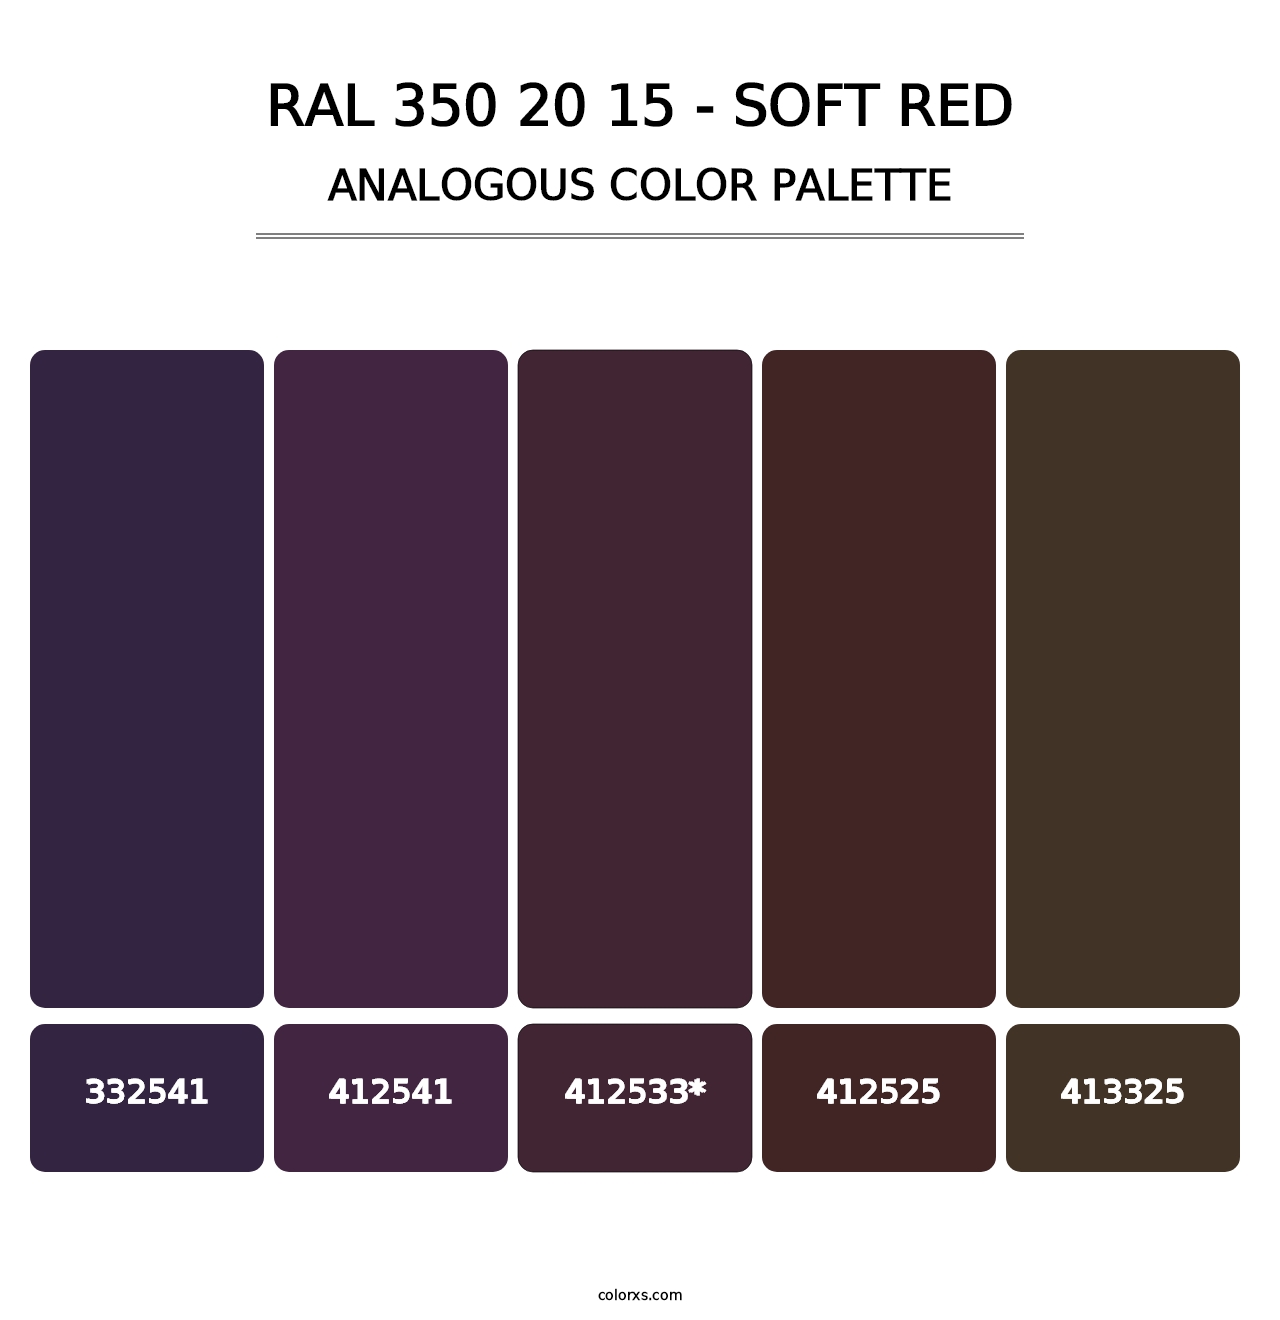 RAL 350 20 15 - Soft Red - Analogous Color Palette